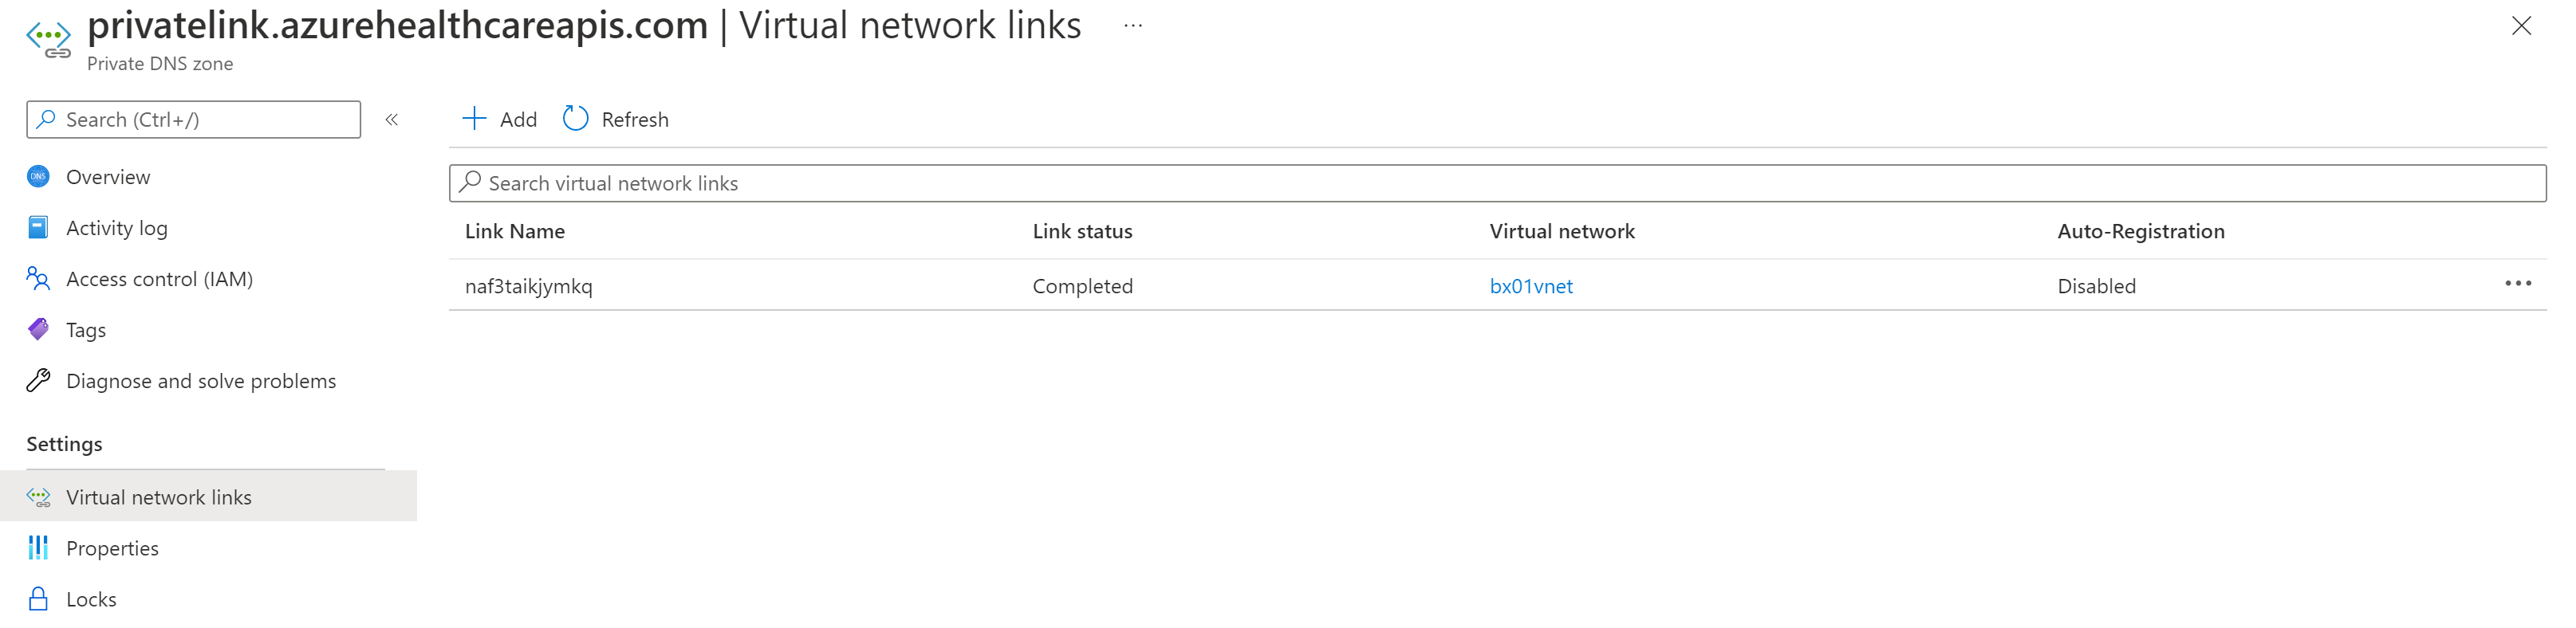 Screenshot showing image of Private Link virtual network Link FHIR.